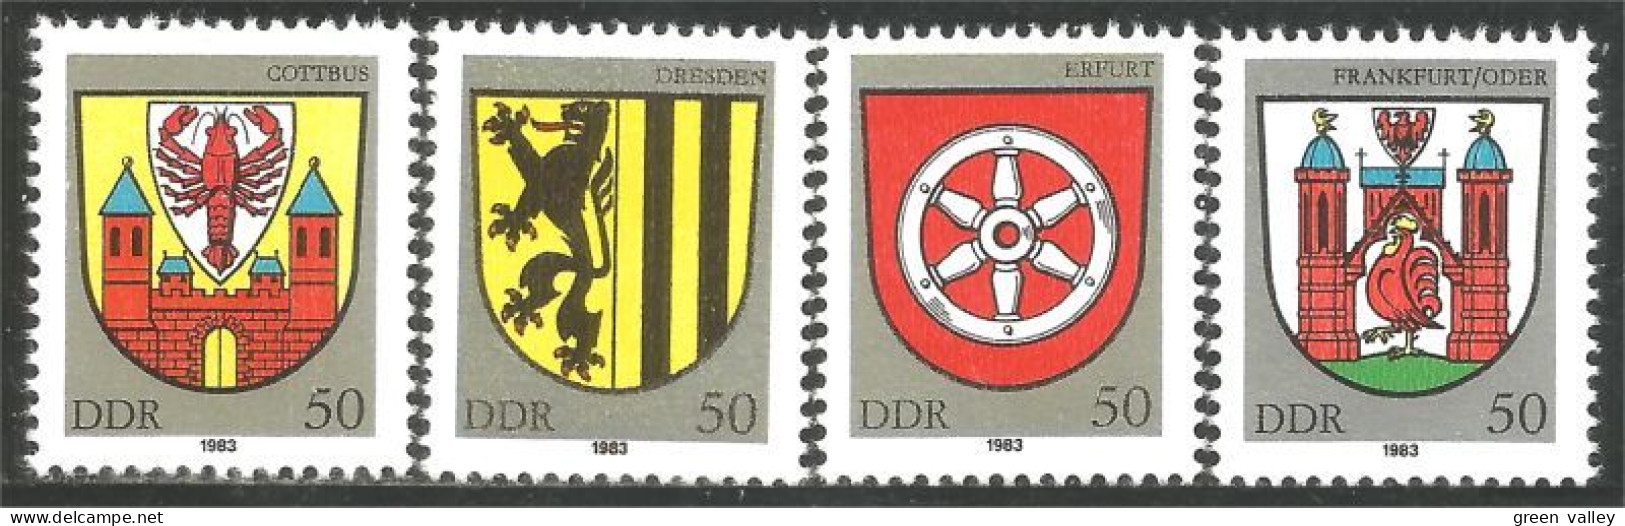 444 Germany DDR Armoiries Coat Arms Cottbus Dresden Erfurt Frankfurt MNH ** Neuf SC (DDR-51) - Timbres